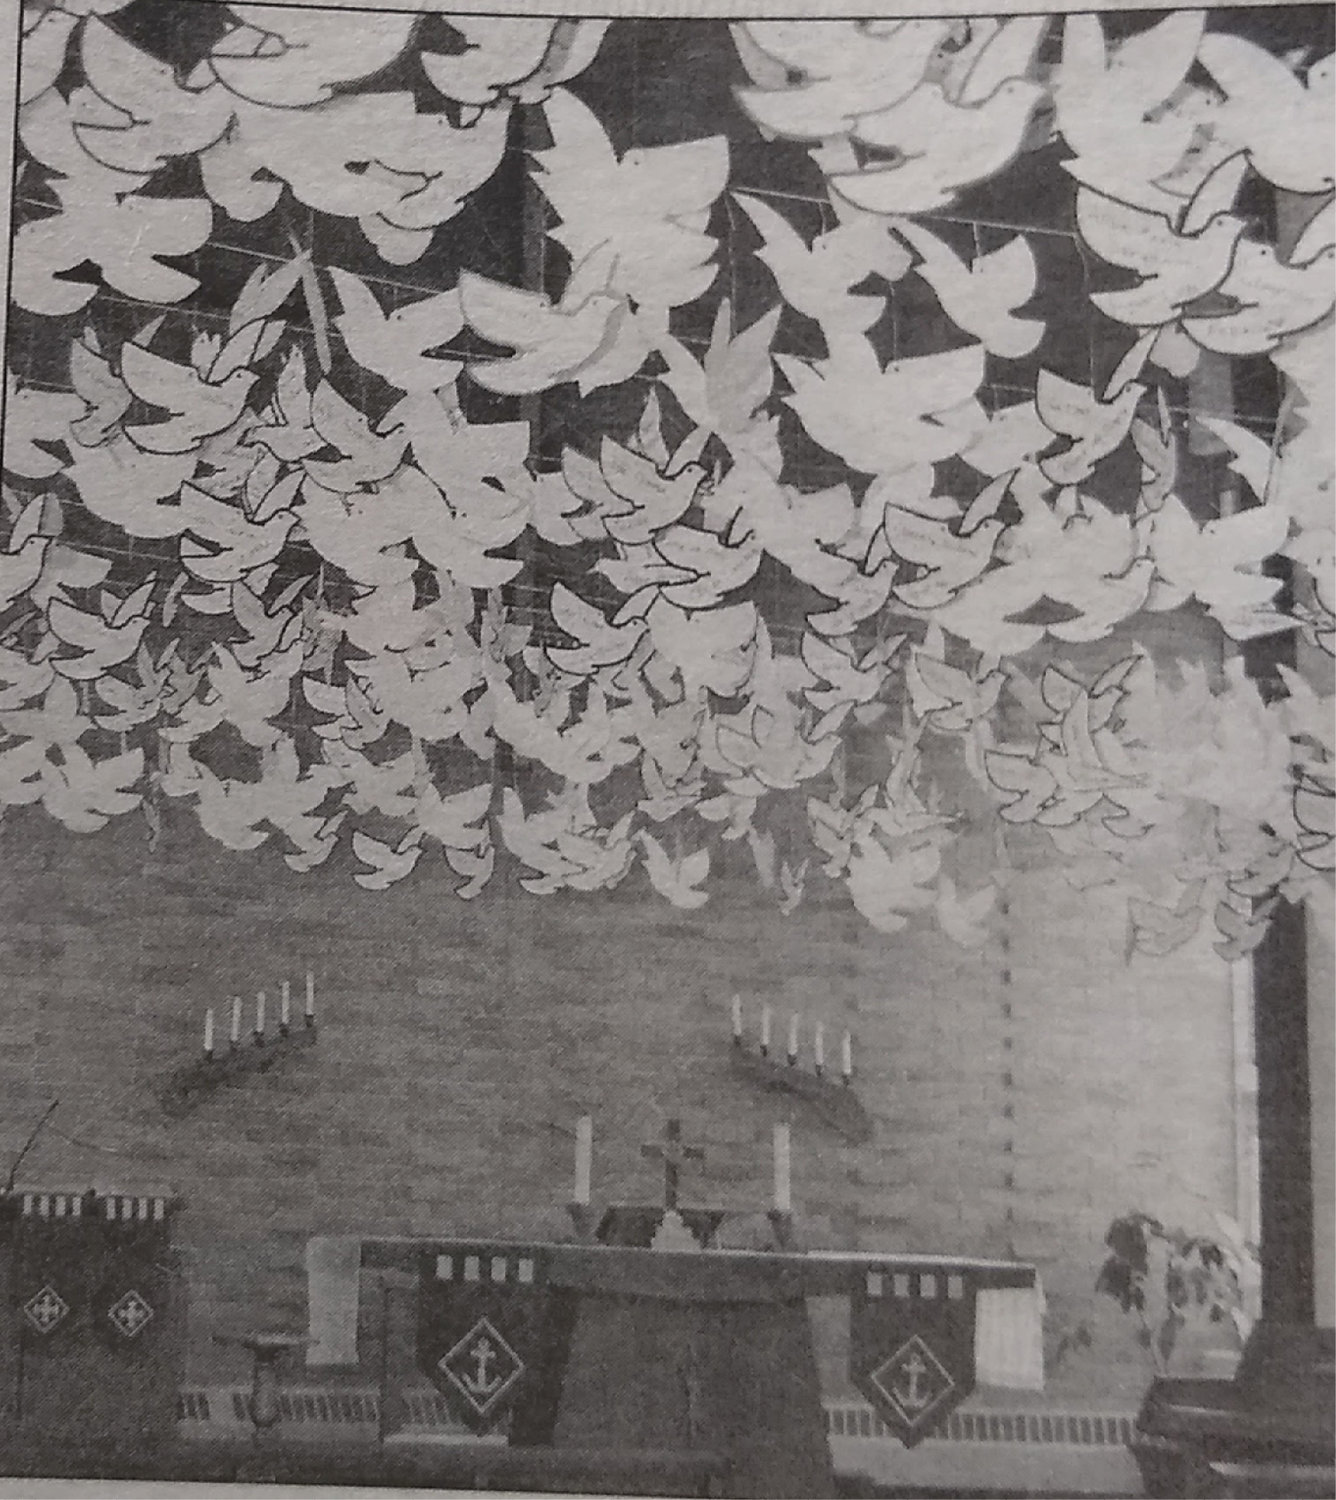 TEN YEARS AGO: The dove represents peace, a meek and quiet spirit, as well as the Holy Spirit. The Lake Preston Lutheran Church celebrates 125 years this weekend and as part of the festivities, the church members hung nearly 1,500 white doves to represent the baptized members since 1887.